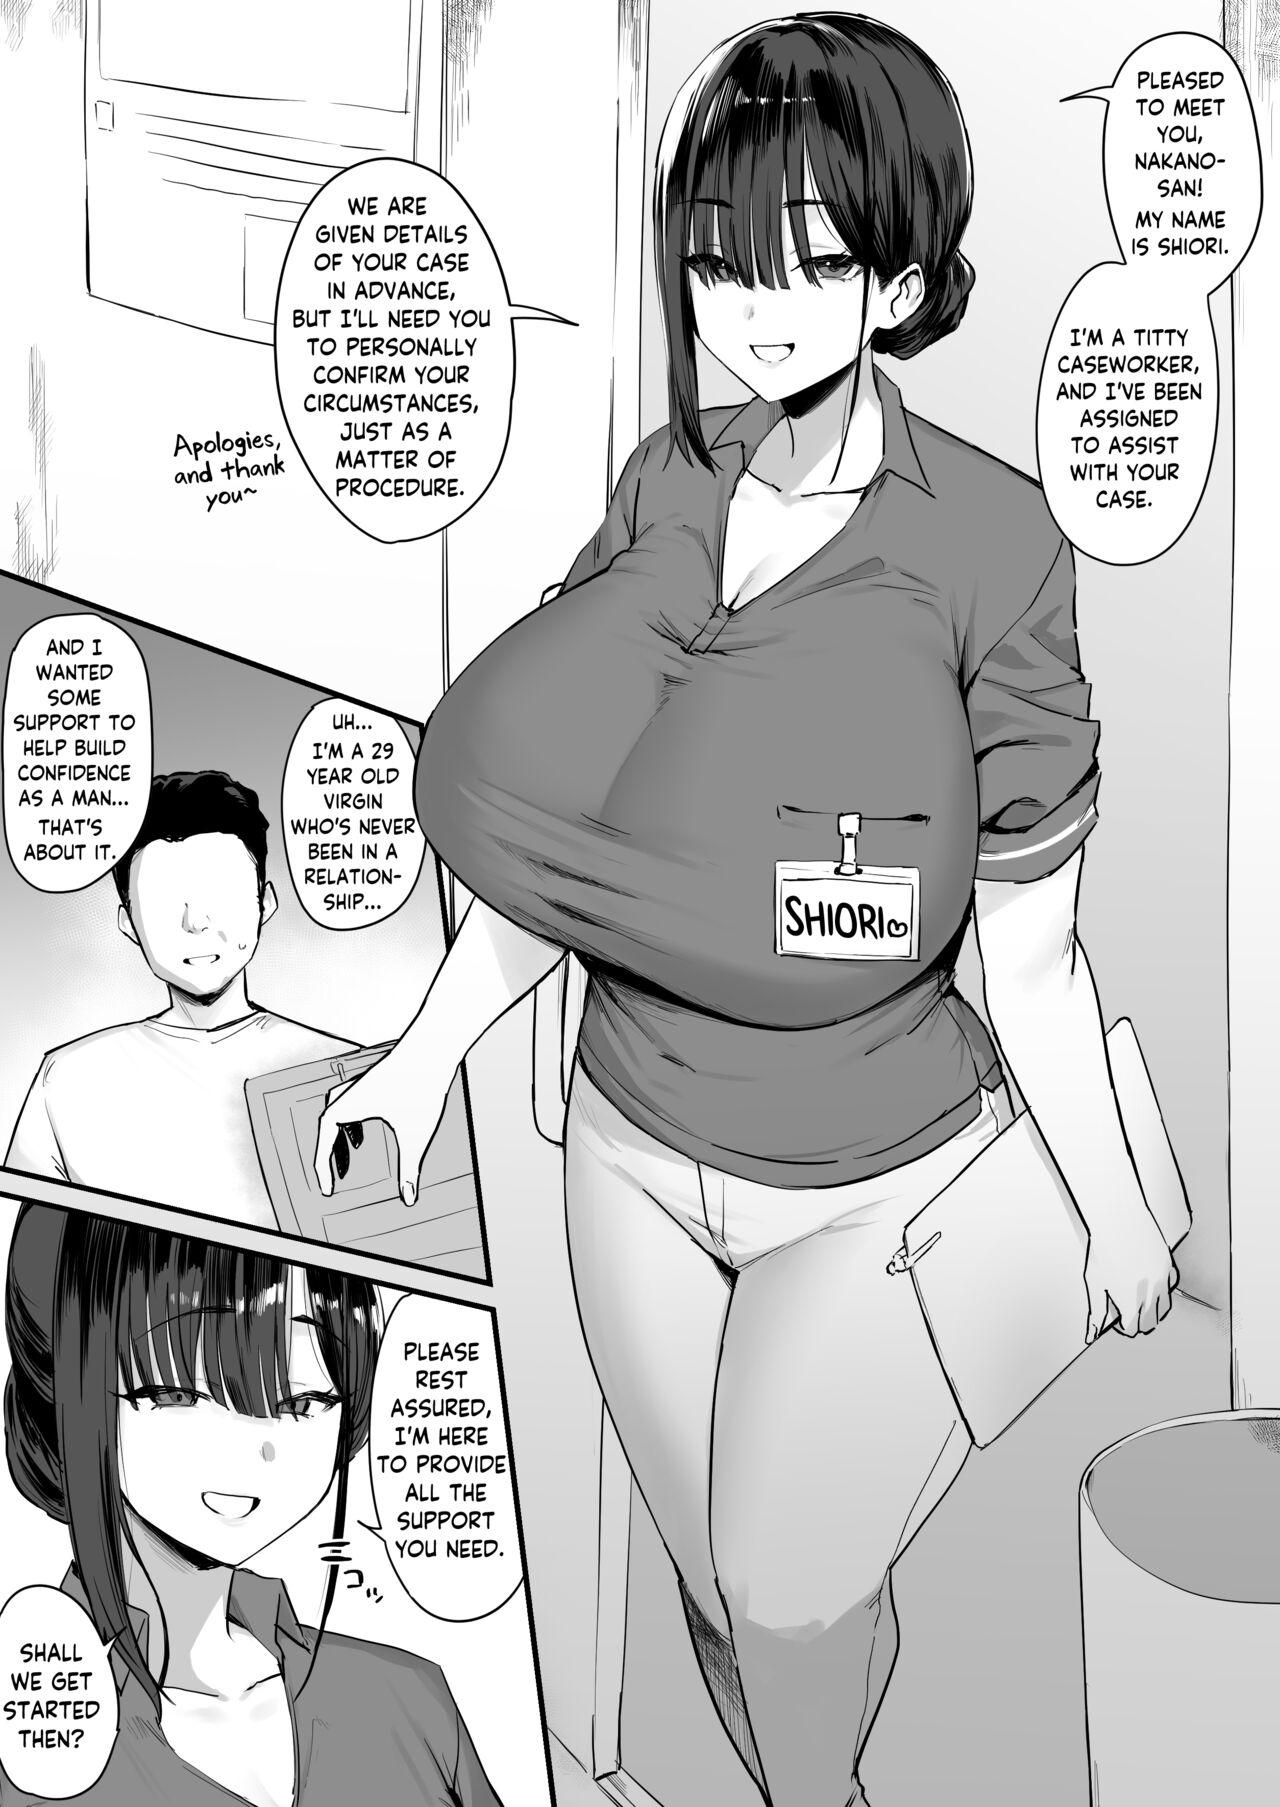 HD Oppai Caseworker | Titty Caseworker - Original Married - Picture 1